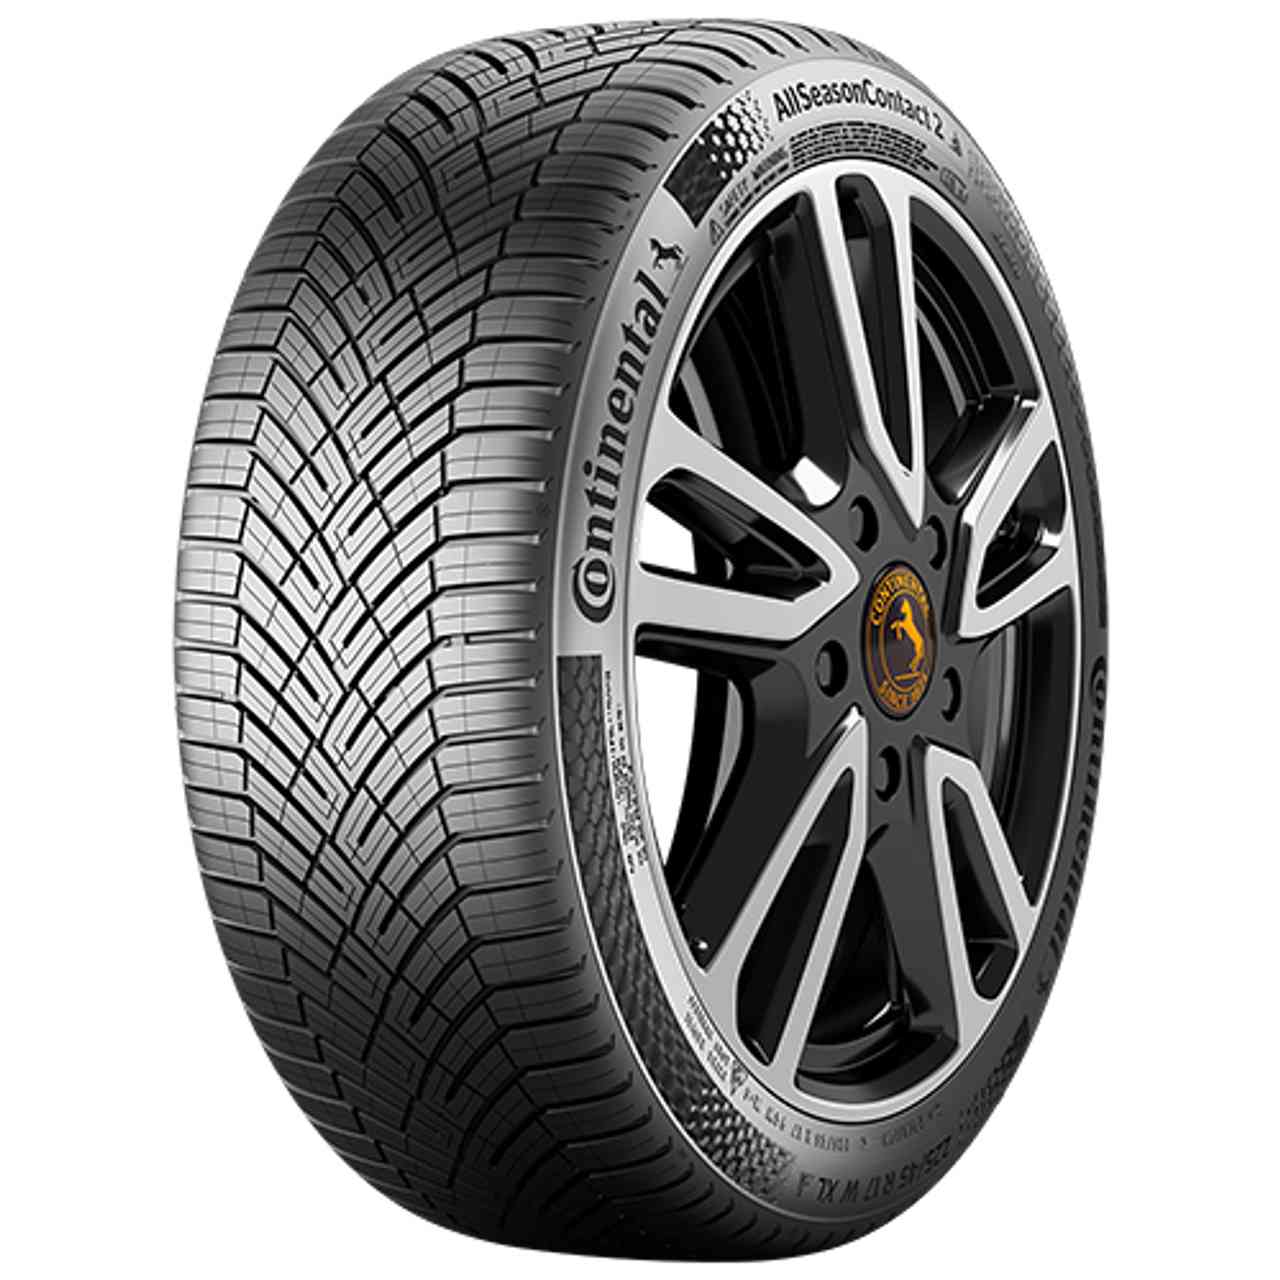 CONTINENTAL ALLSEASONCONTACT 2 (EVc) 255/40R21 102T FR BSW